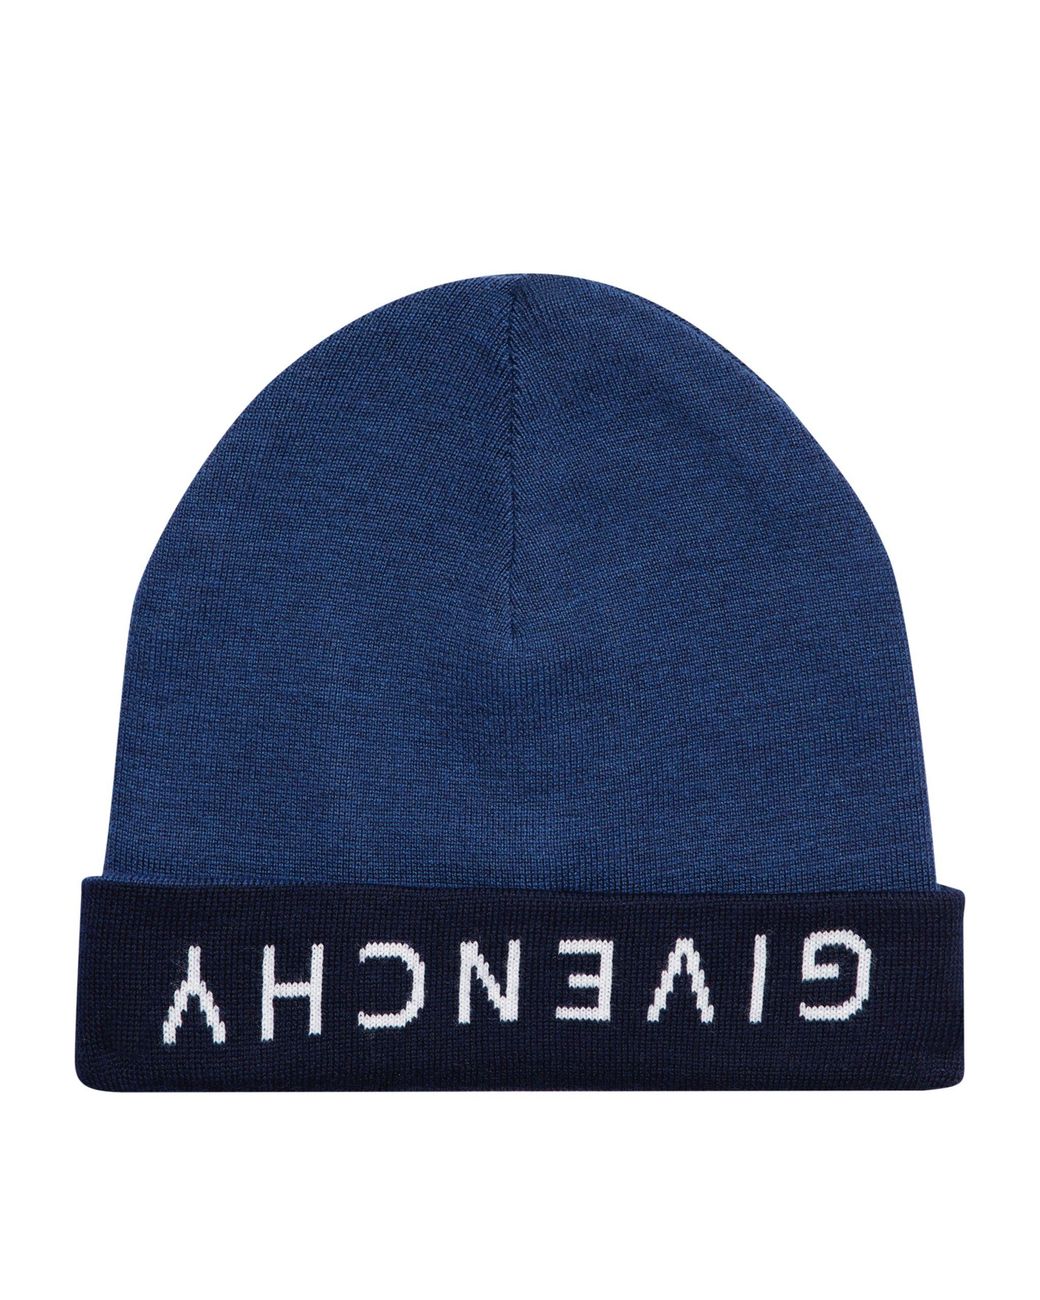 Givenchy Wool Logo Reversible Beanie Hat in Blue for Men - Lyst